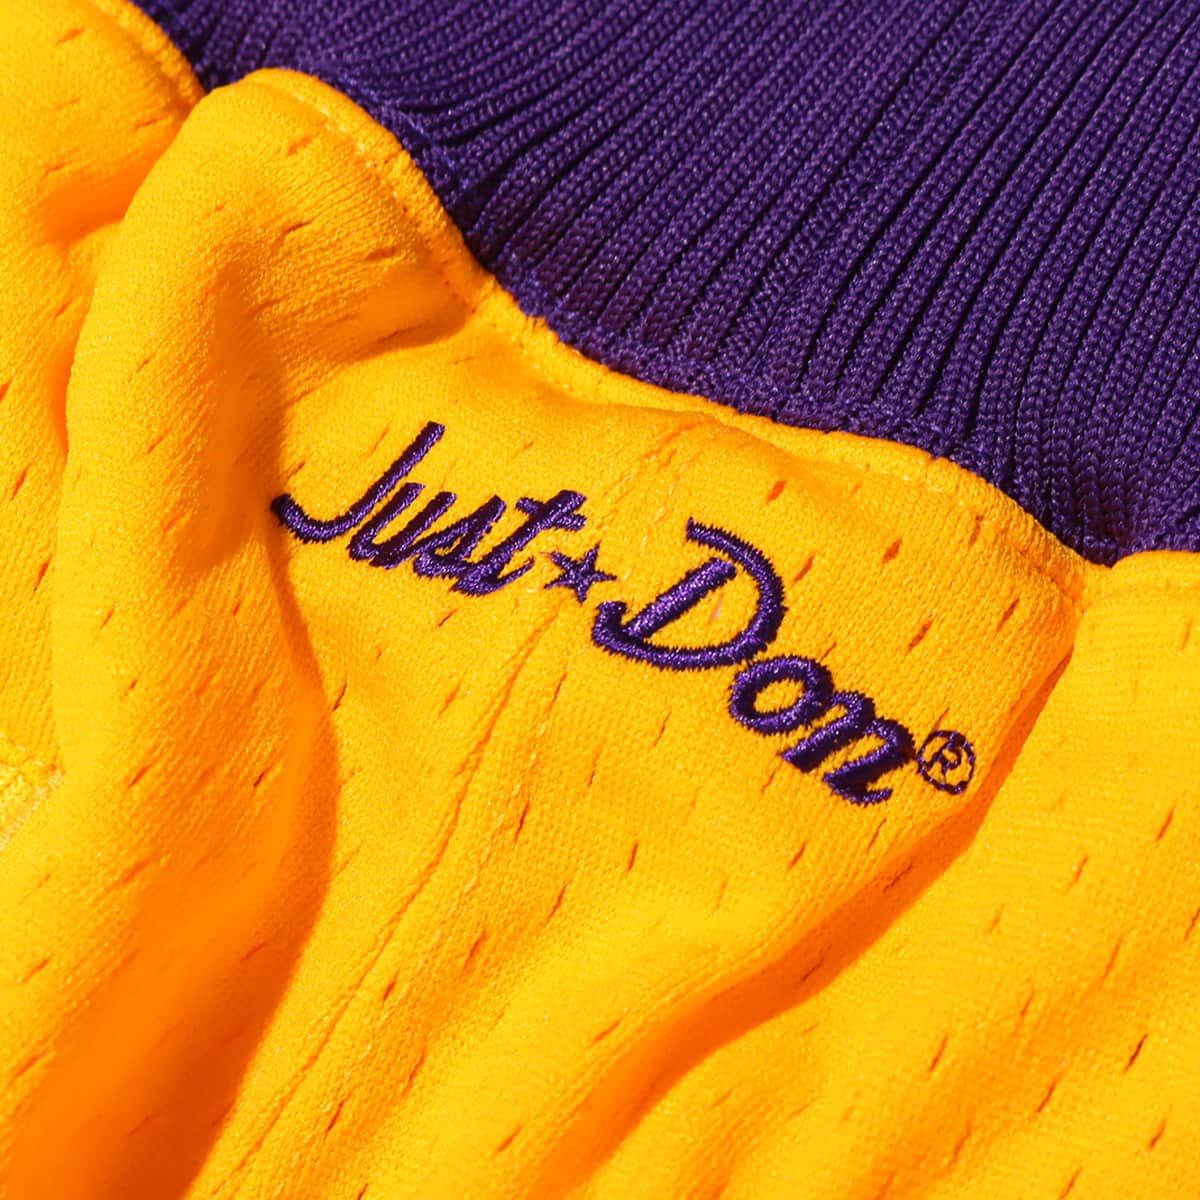 New wout Tags Just Don x Mitchell Ness 1996 Lakers India